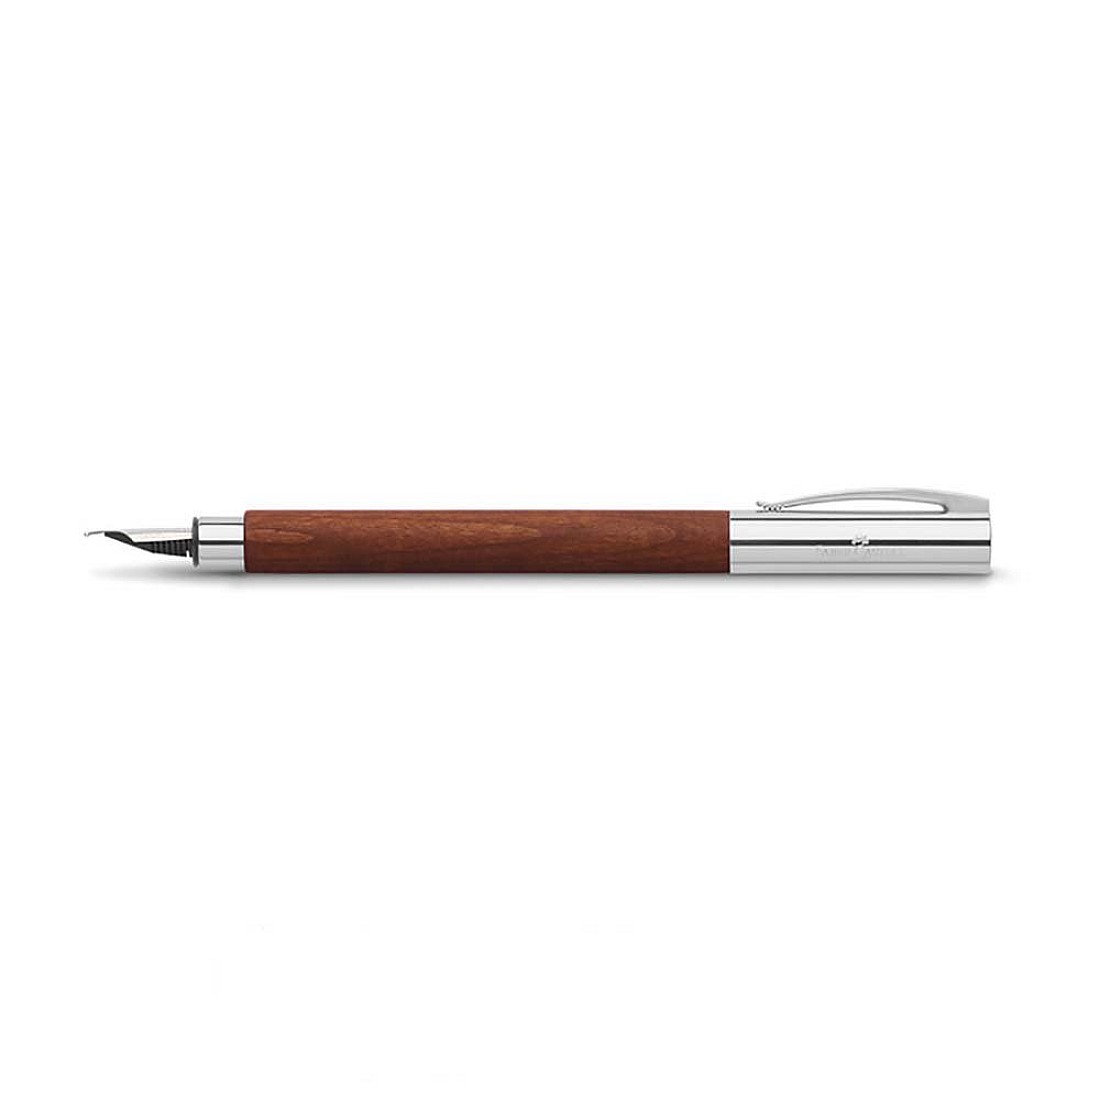 Faber-Castell Ambition Pearwood Fountain pen